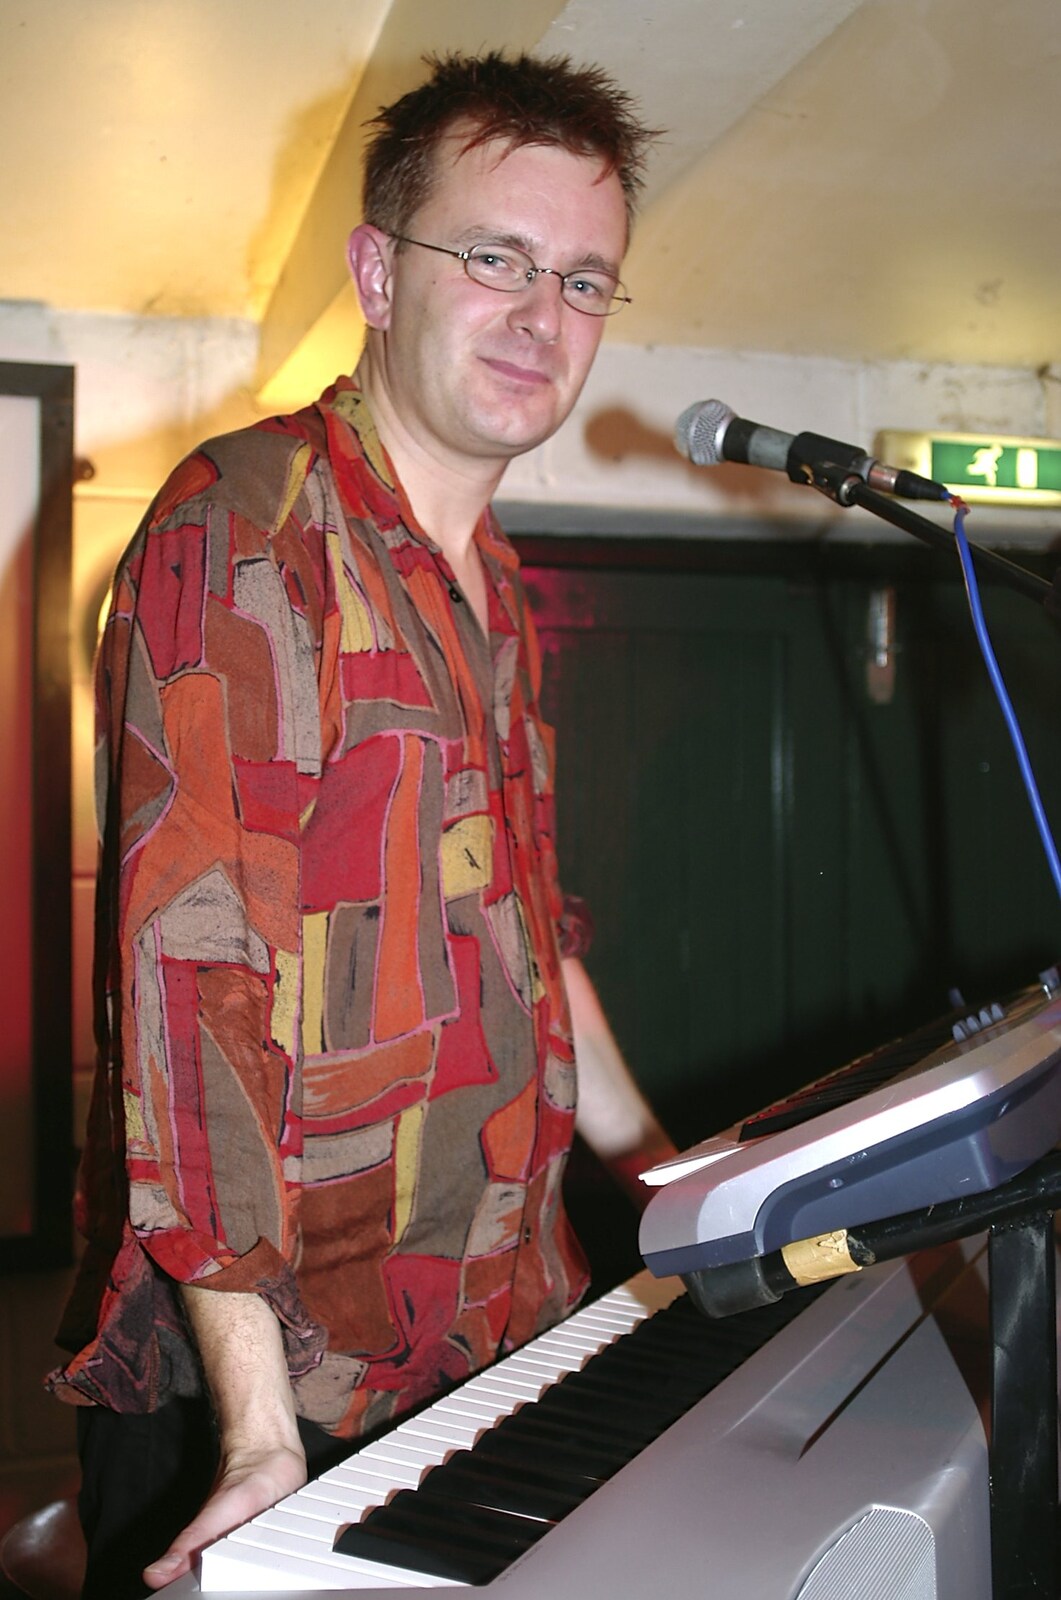 Nosher at his keyboards from The BBs' Last-Ever Gig at The Cider Shed, Banham, Norfolk - 19th November 2004